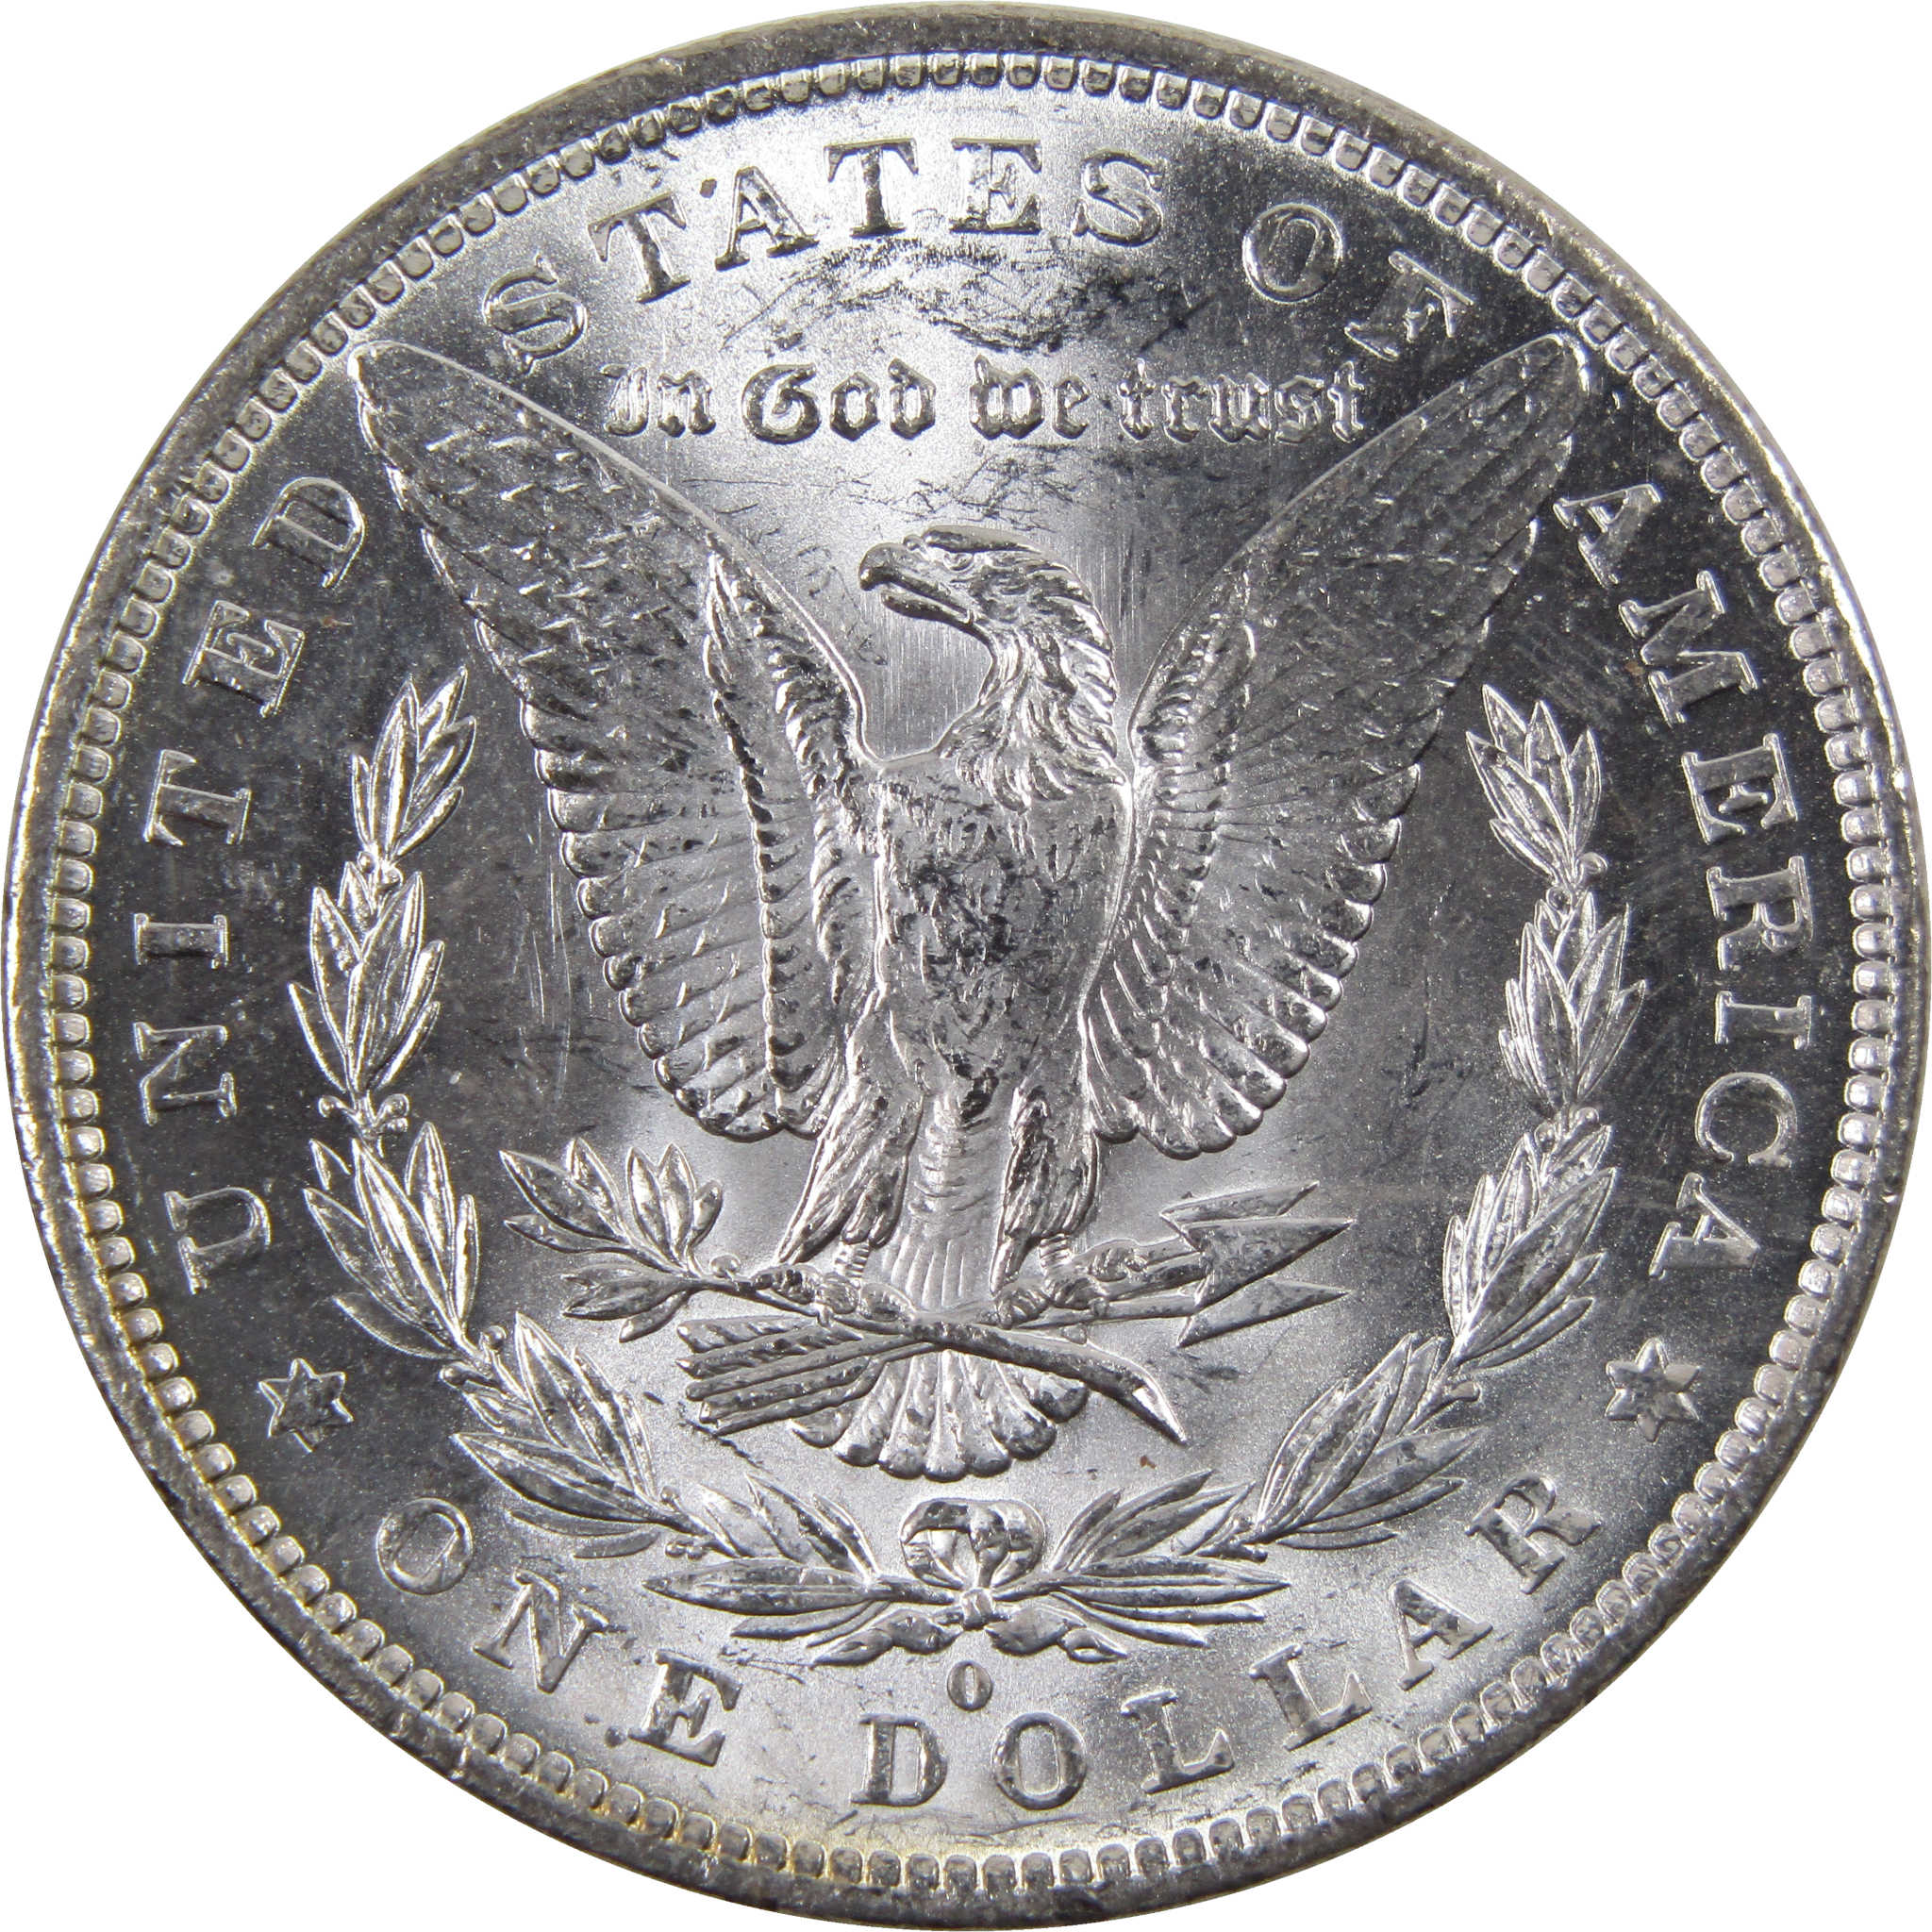 1883 O Morgan Dollar BU Uncirculated Mint State 90% Silver SKU:I3461 - Morgan coin - Morgan silver dollar - Morgan silver dollar for sale - Profile Coins &amp; Collectibles